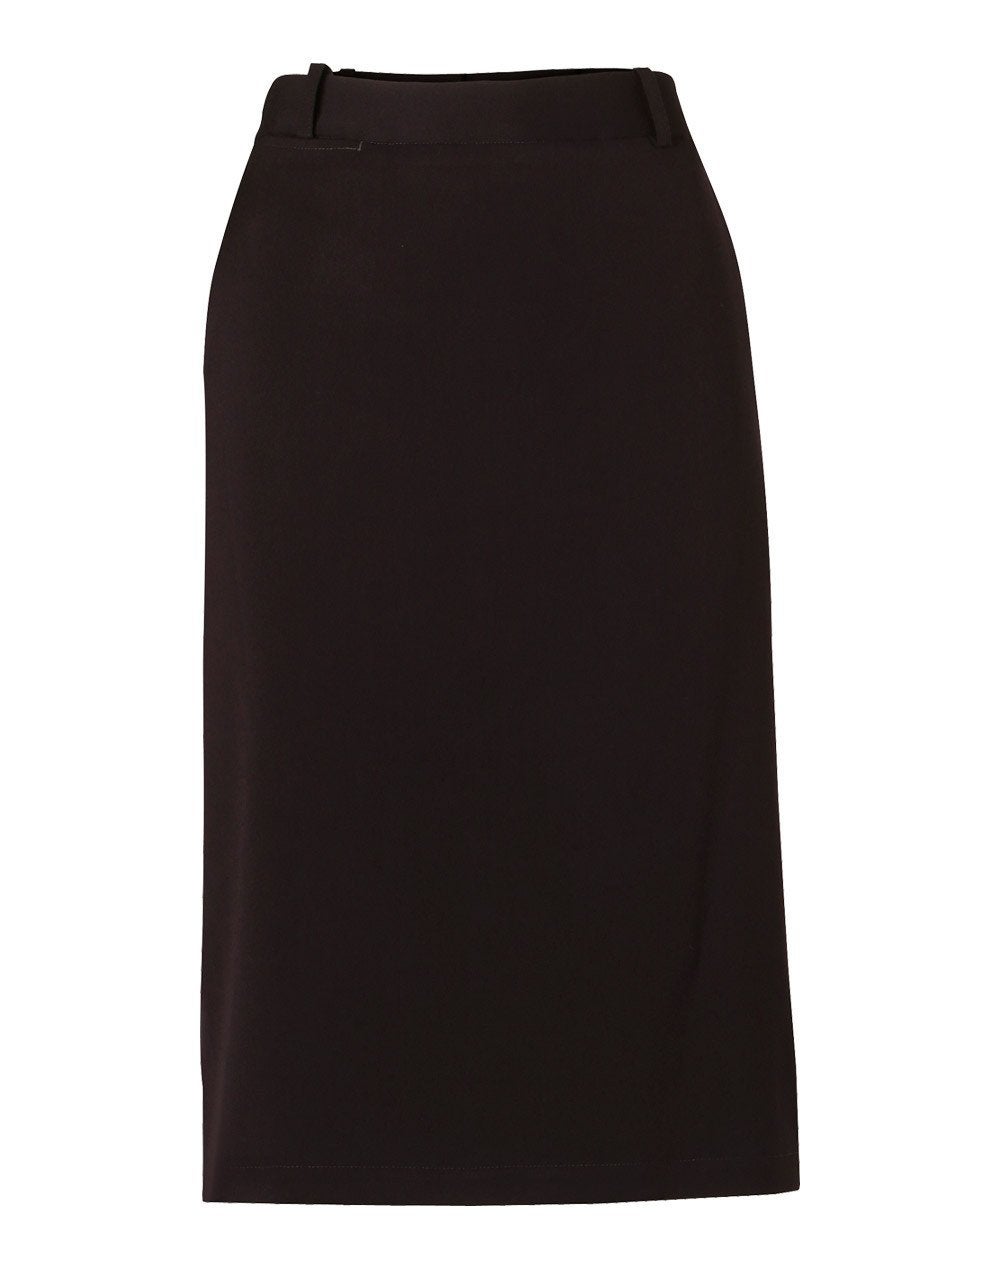 Women's Poly/Viscose Utility Lined Skirt